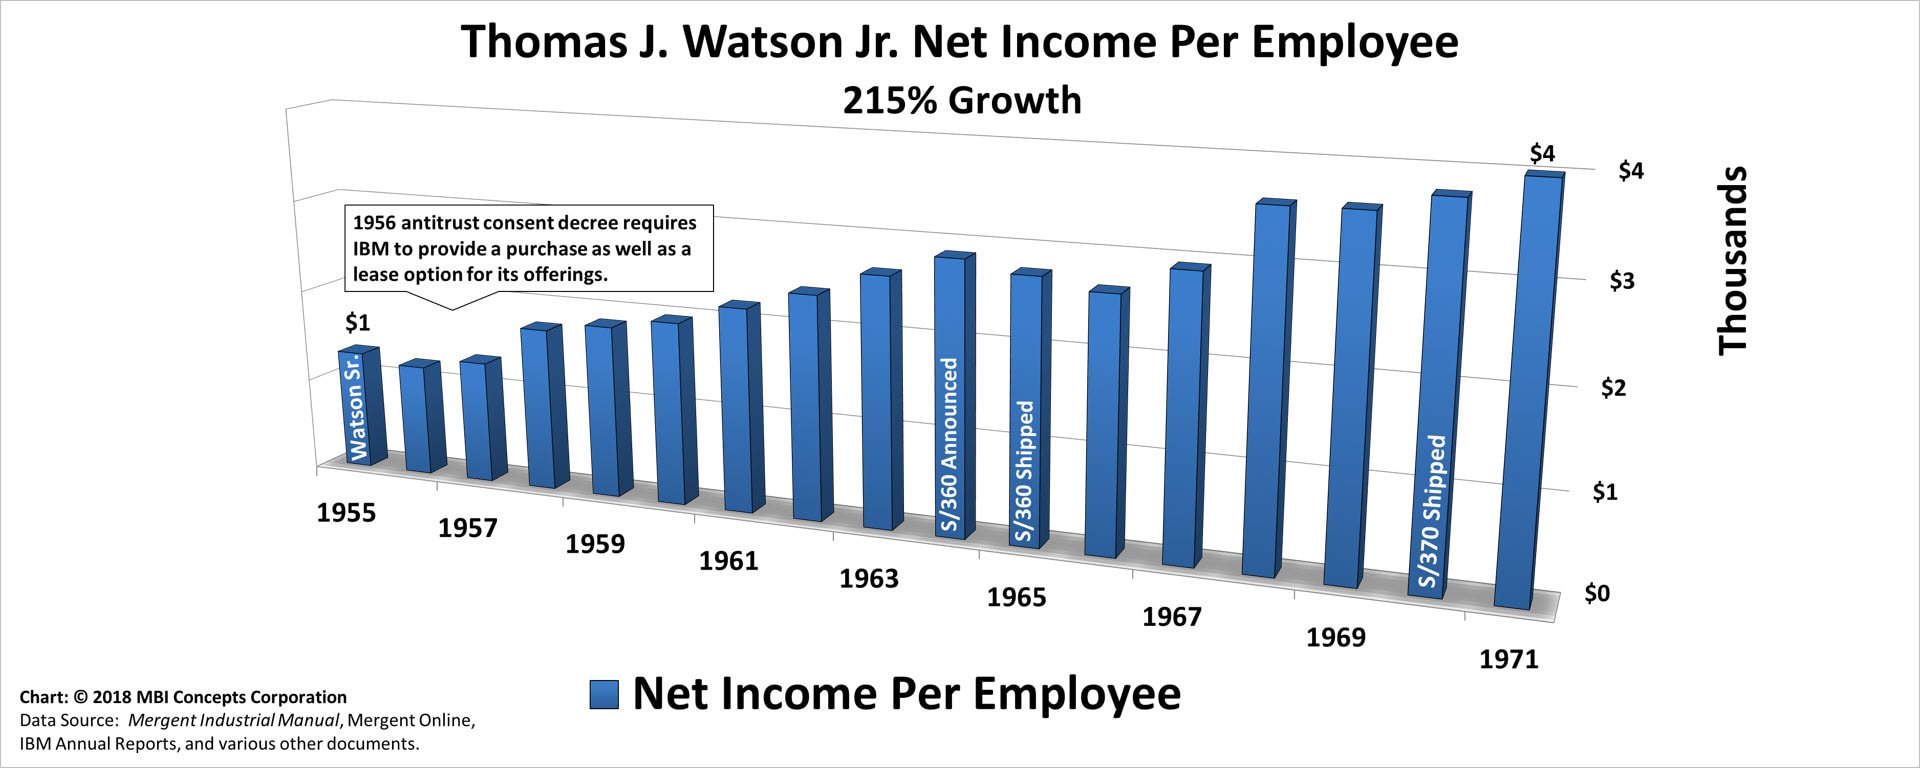 A color bar chart showing IBM's yearly net income (profit) per employee from 1955 to 1971 for IBM Chief Executive Officer Thomas J. Watson Jr.